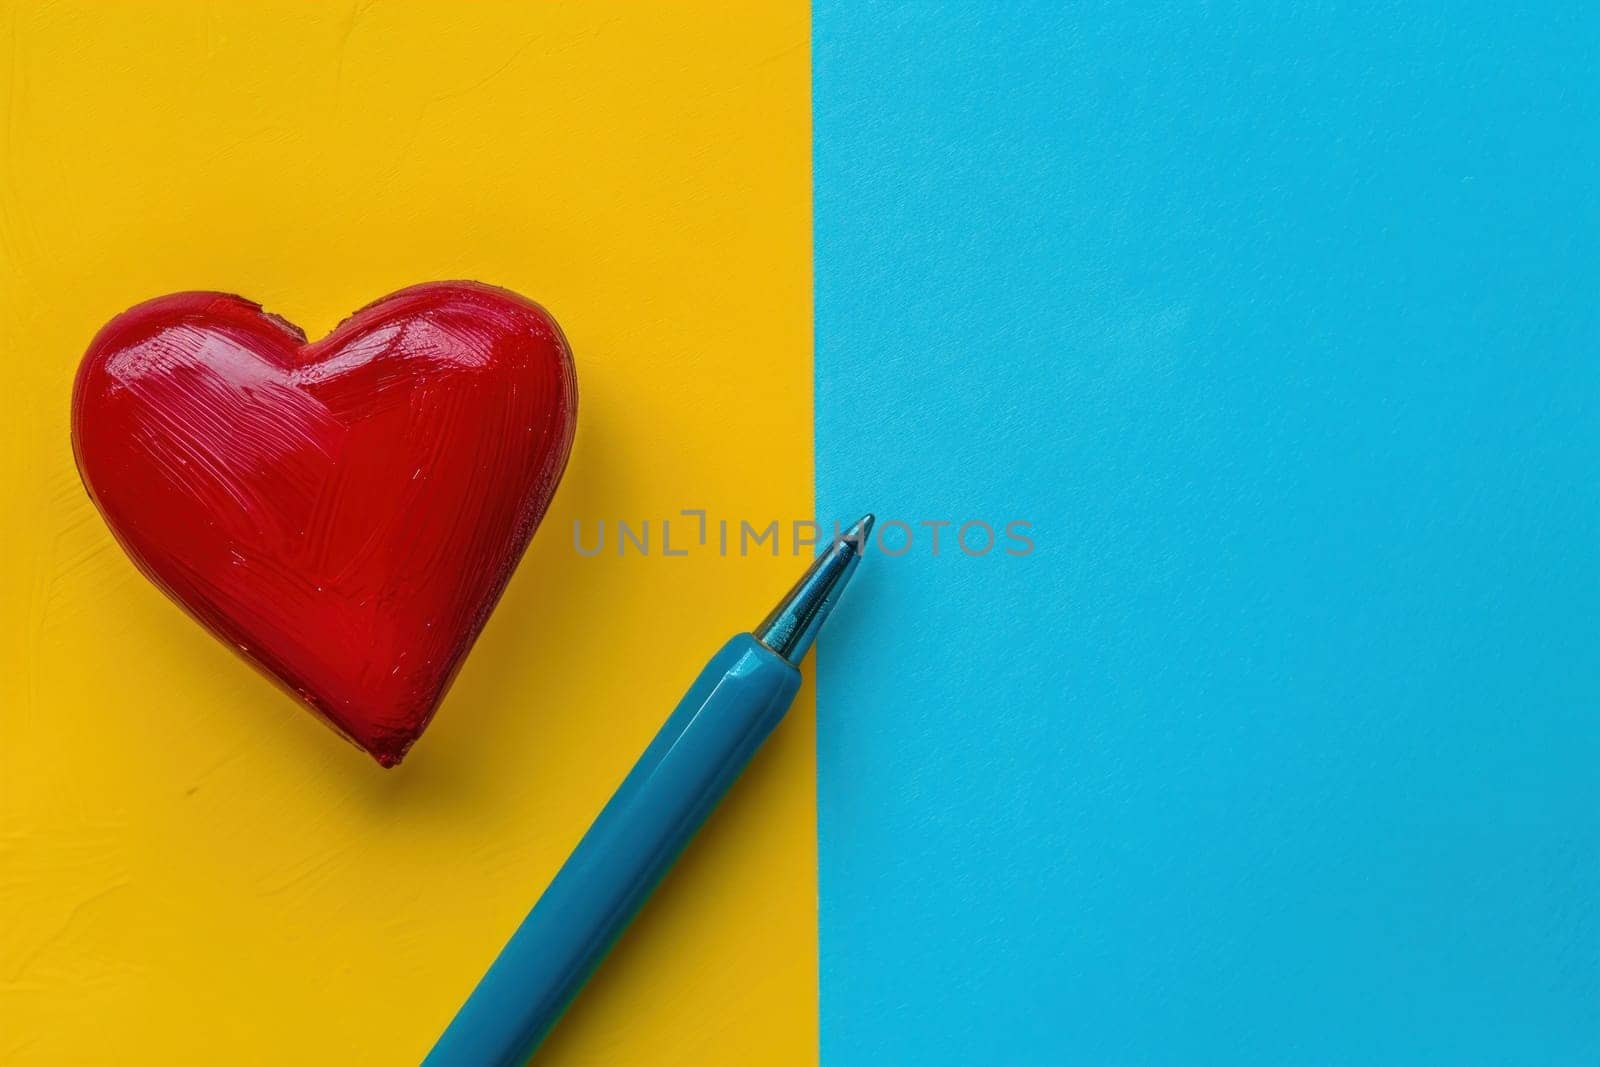 Heart on colorful background with pen, relationship between love and creativity, inspiring artistic design for writing stationery